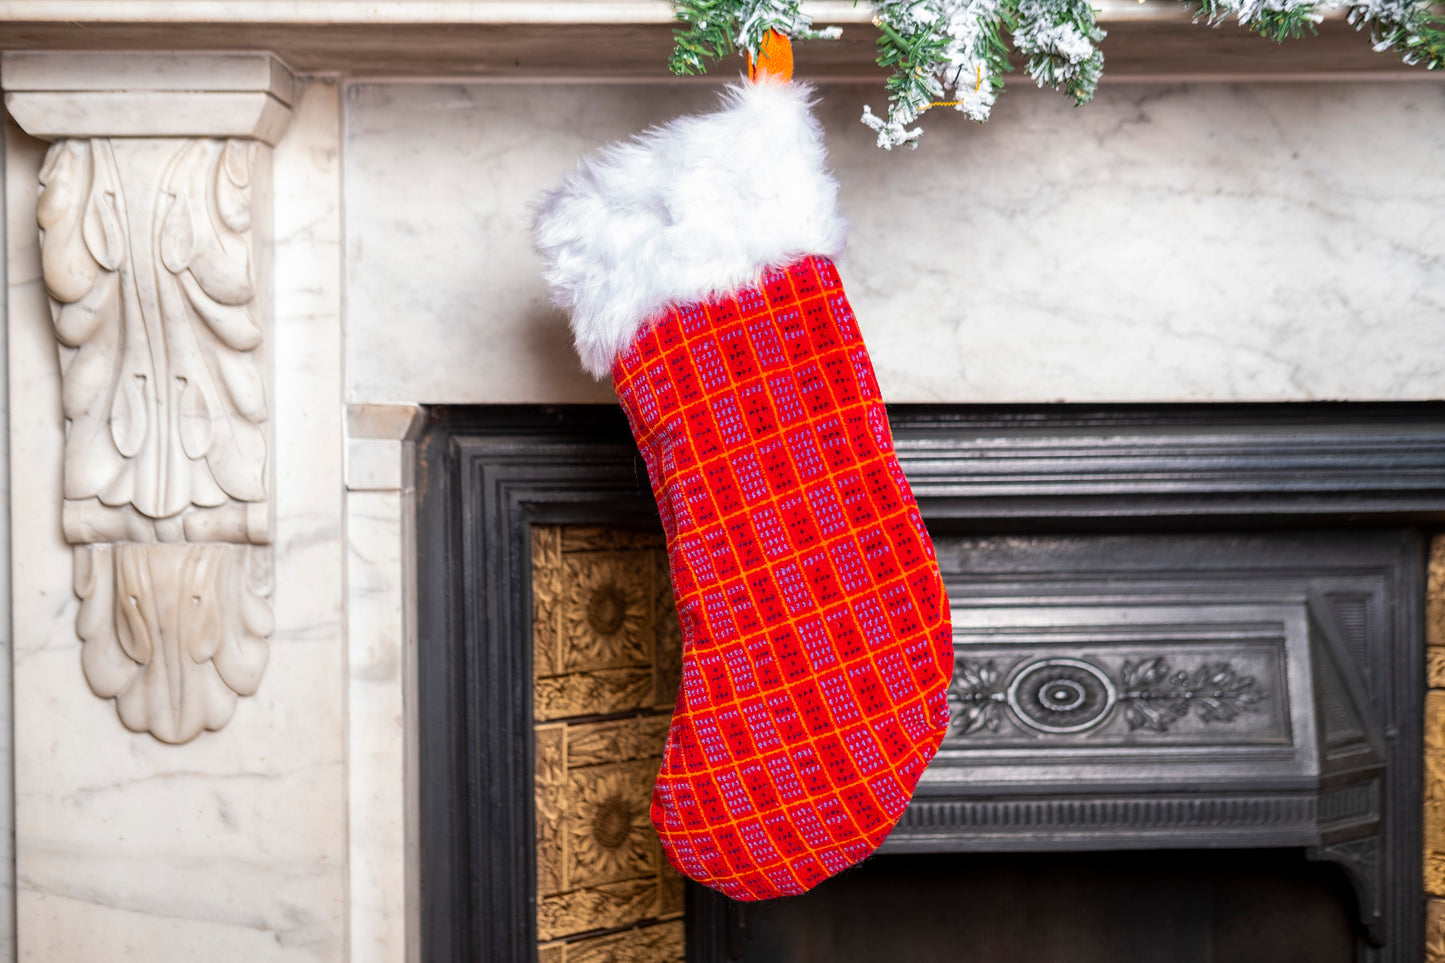 South West Trains 'Timetable' Moquette Christmas Stocking